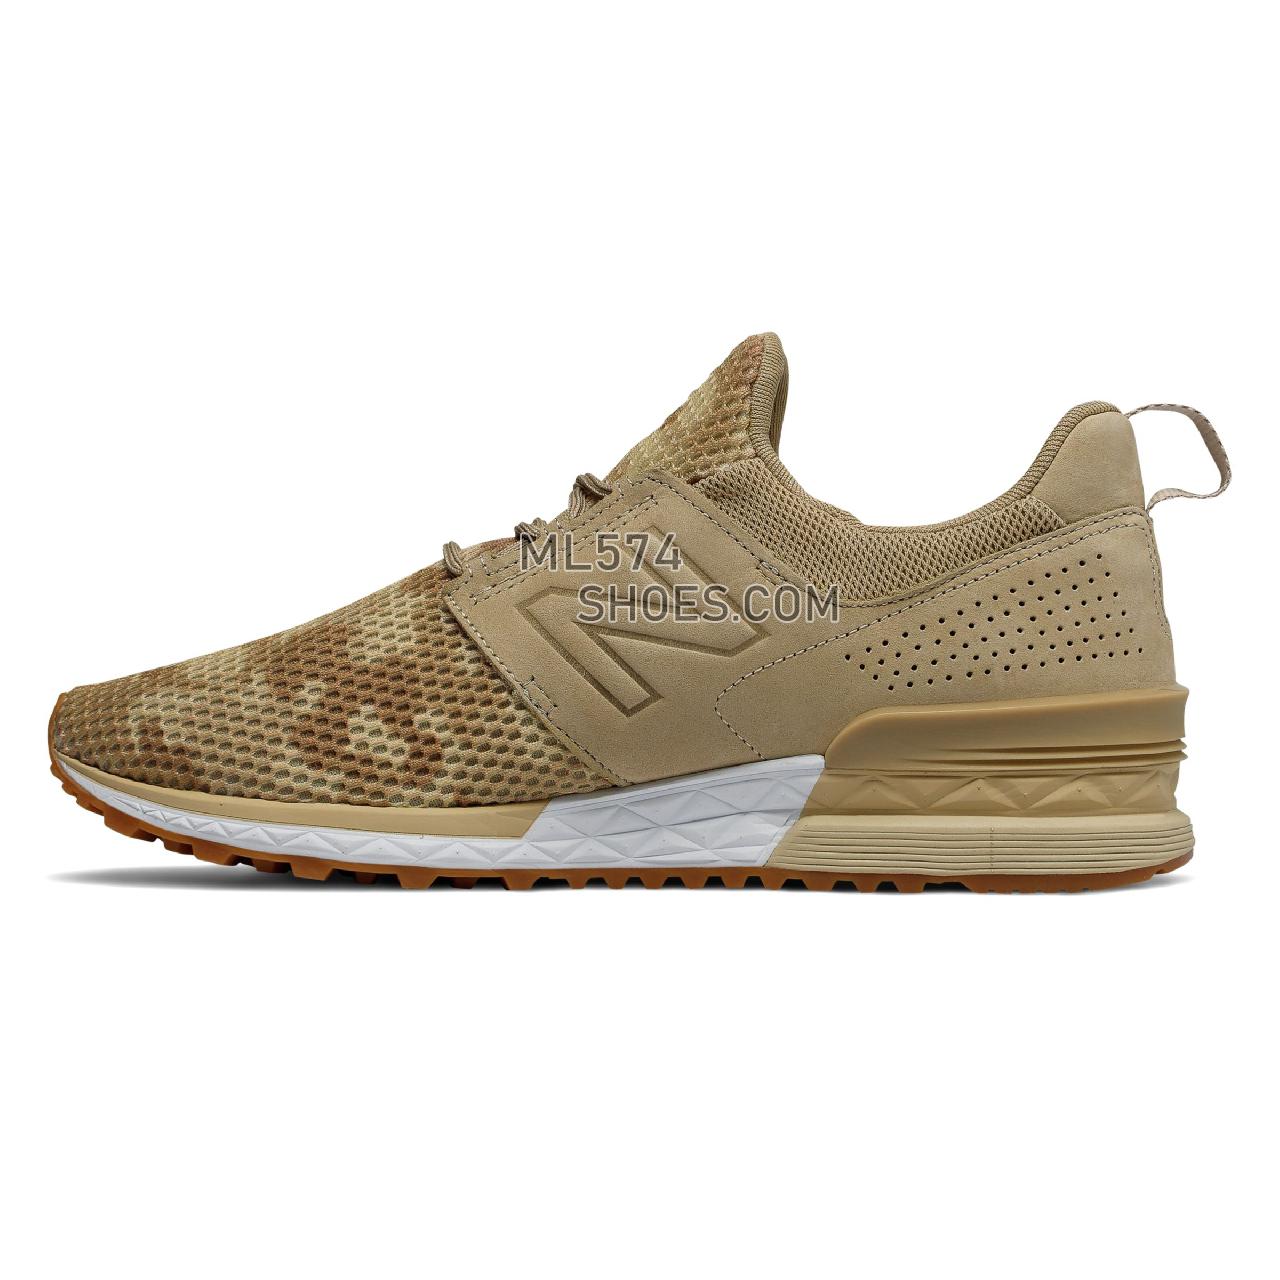 New Balance 574 Sport Decon - Men's 574 - Classic Incense with Tan - MS574DCB